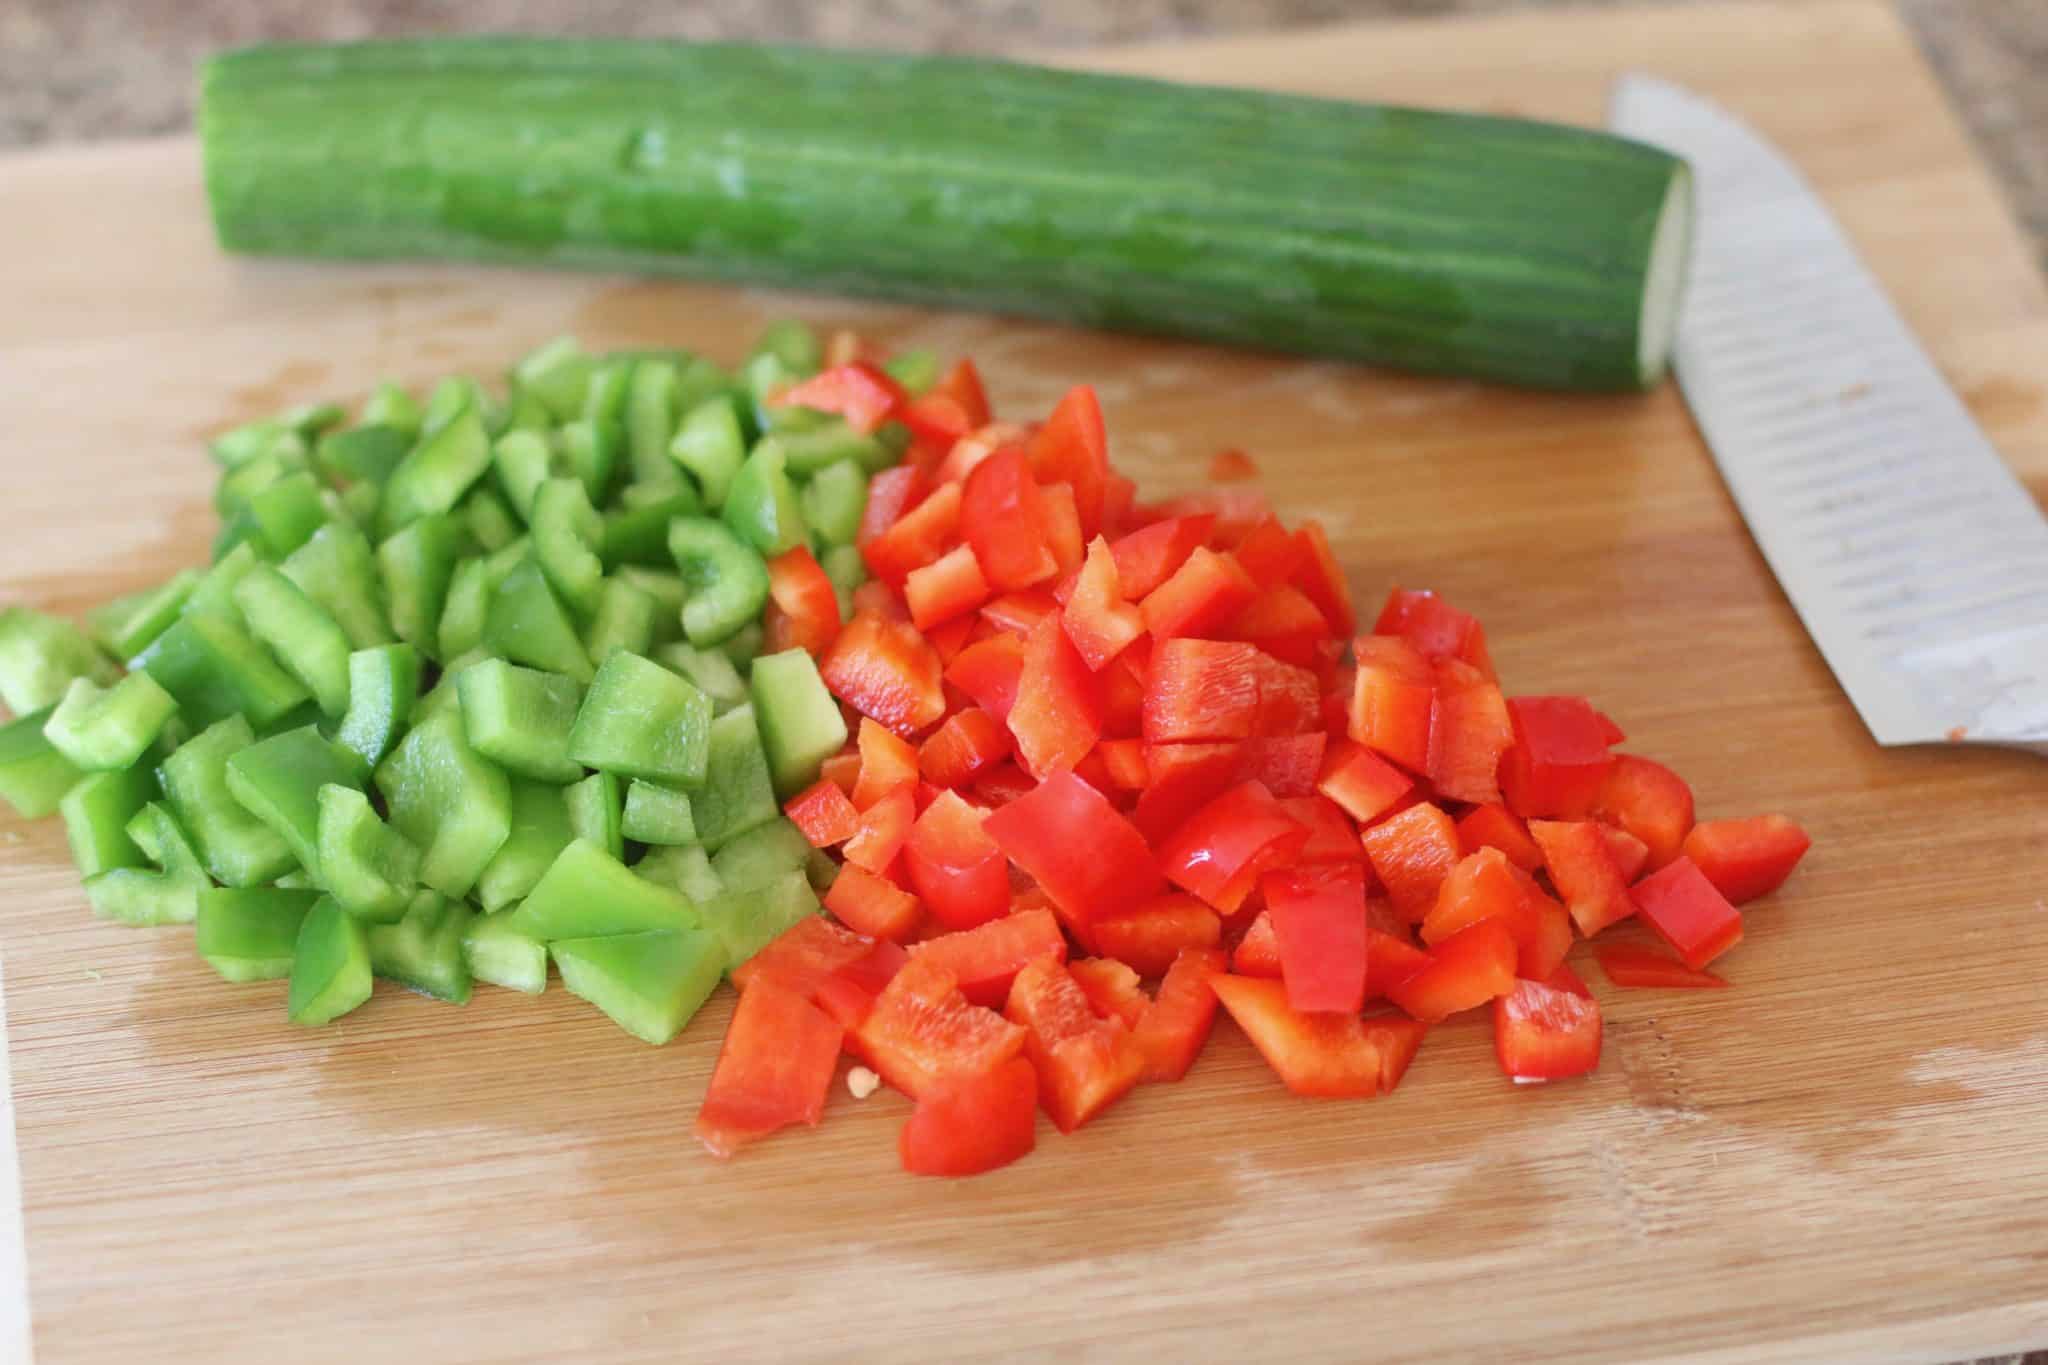 diced cucumbers, green peppers, red pepper on wooden cutting board